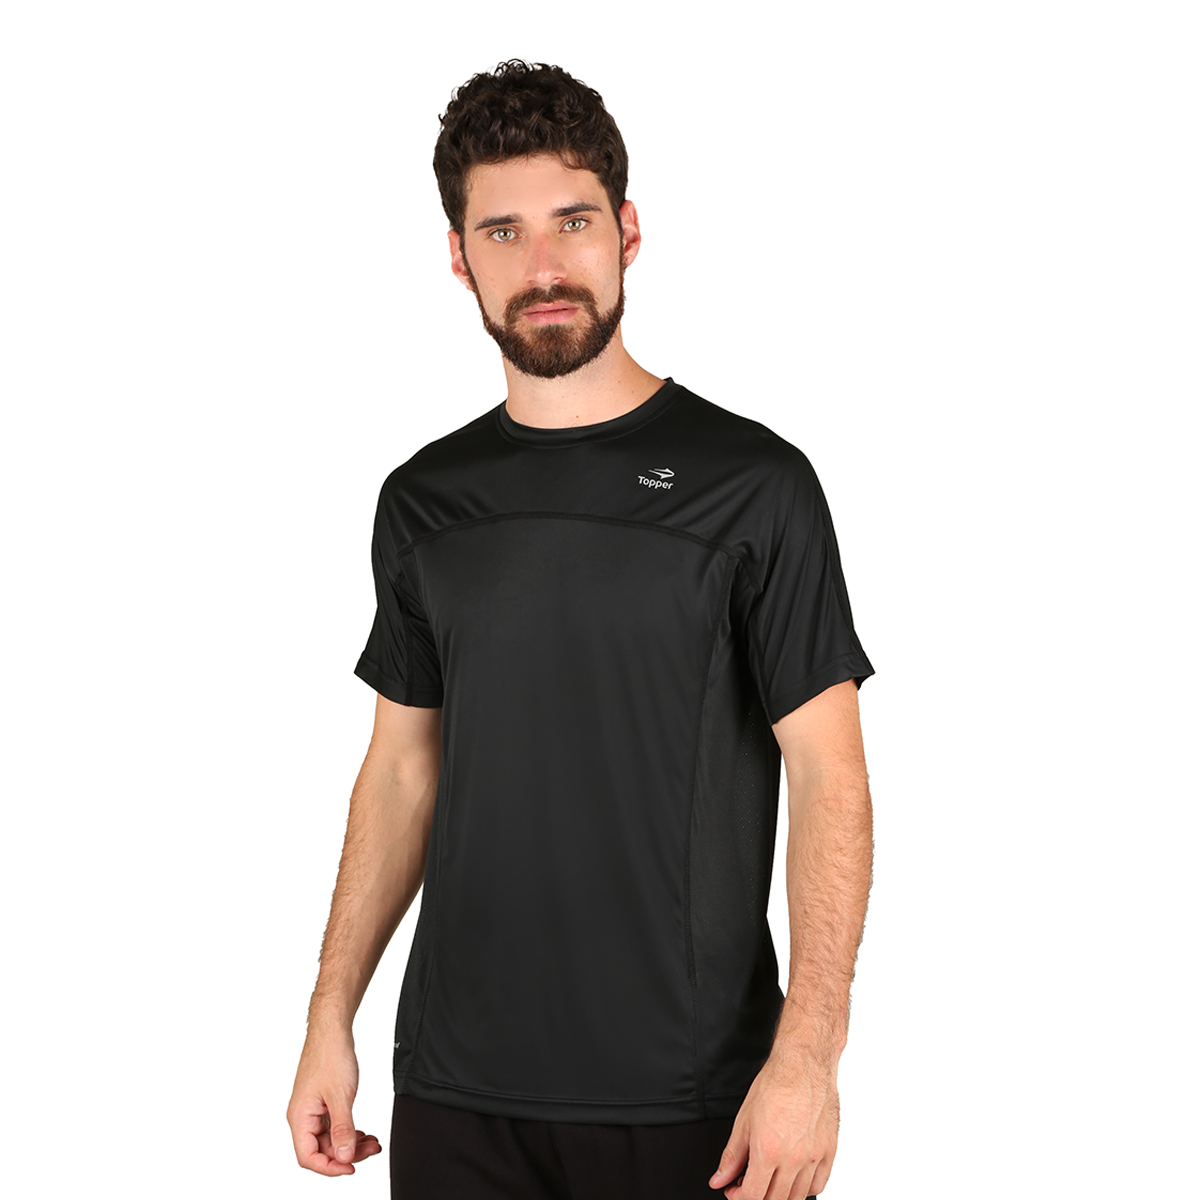 Remera Topper Running Mesh,  image number null